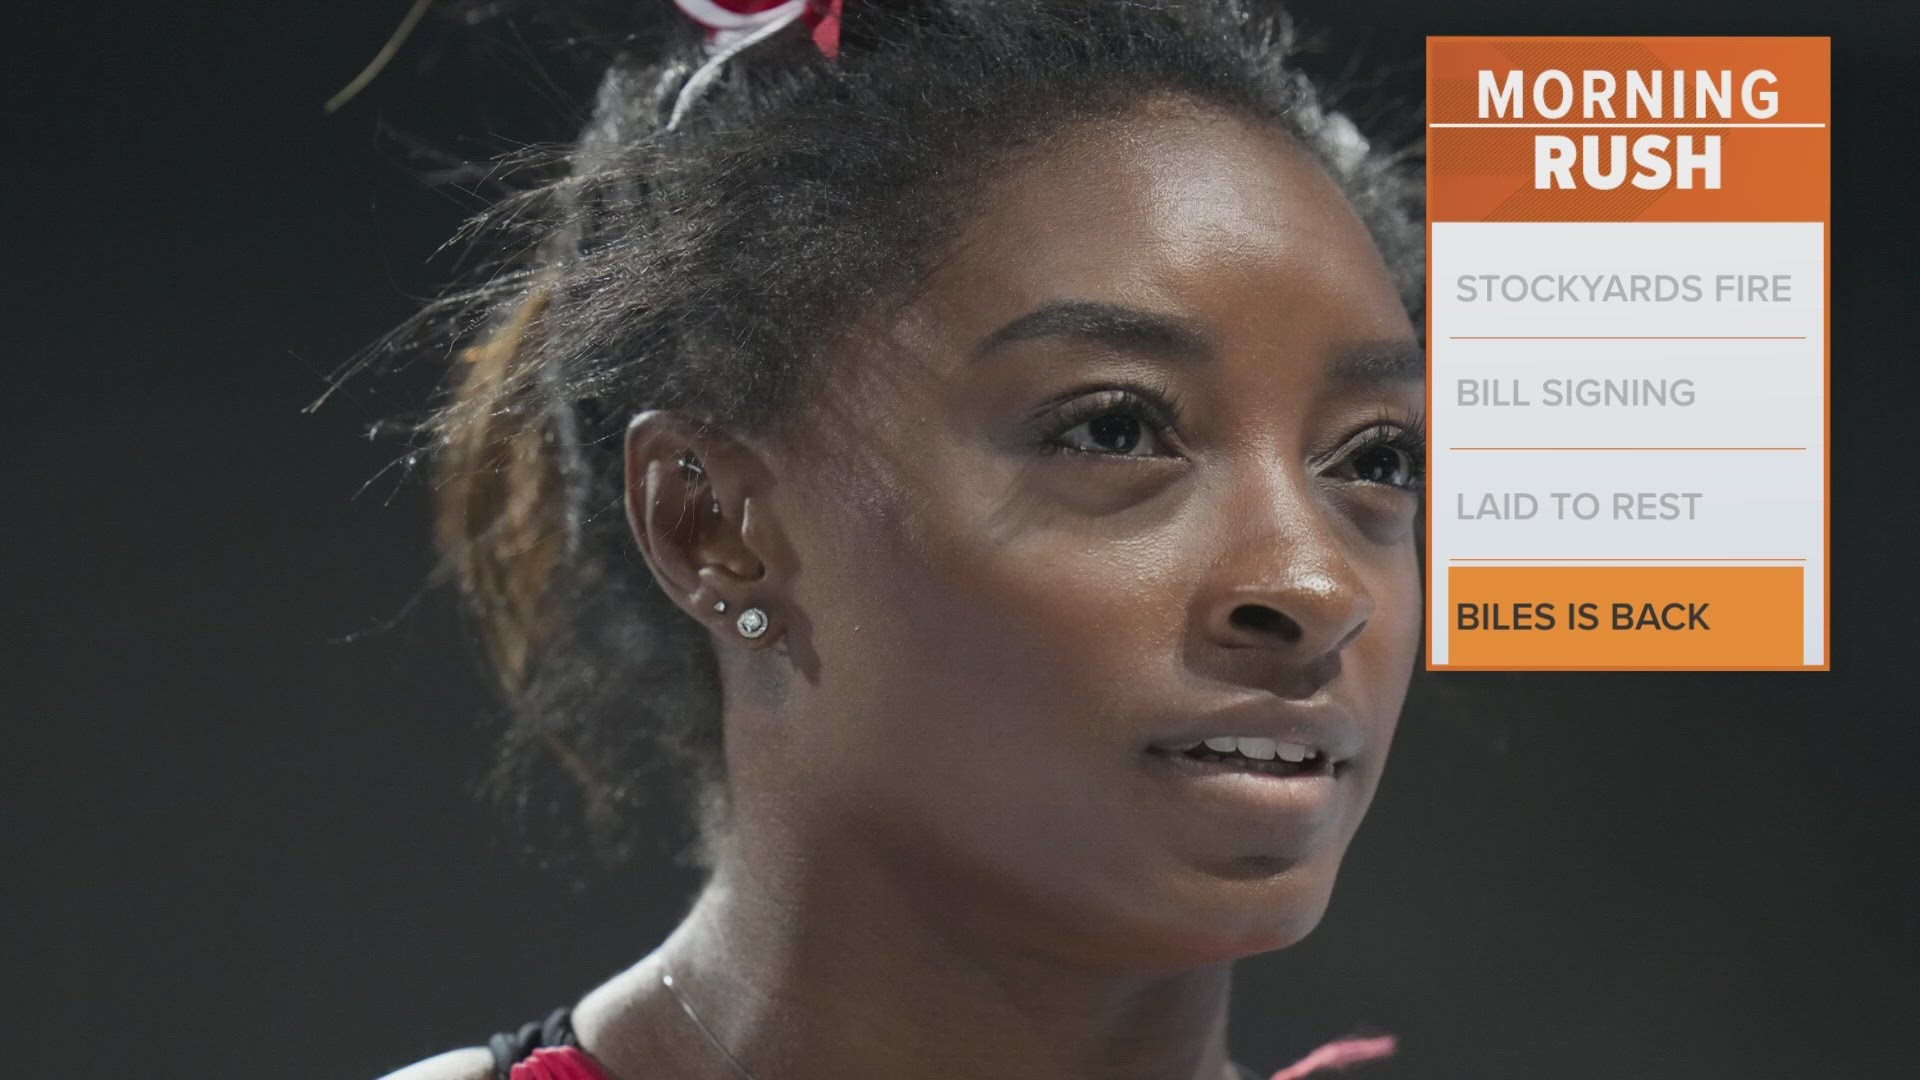 Biles soared to victory in the U.S. Classic on Saturday night in her return following a two-year layoff after the Tokyo Olympics.